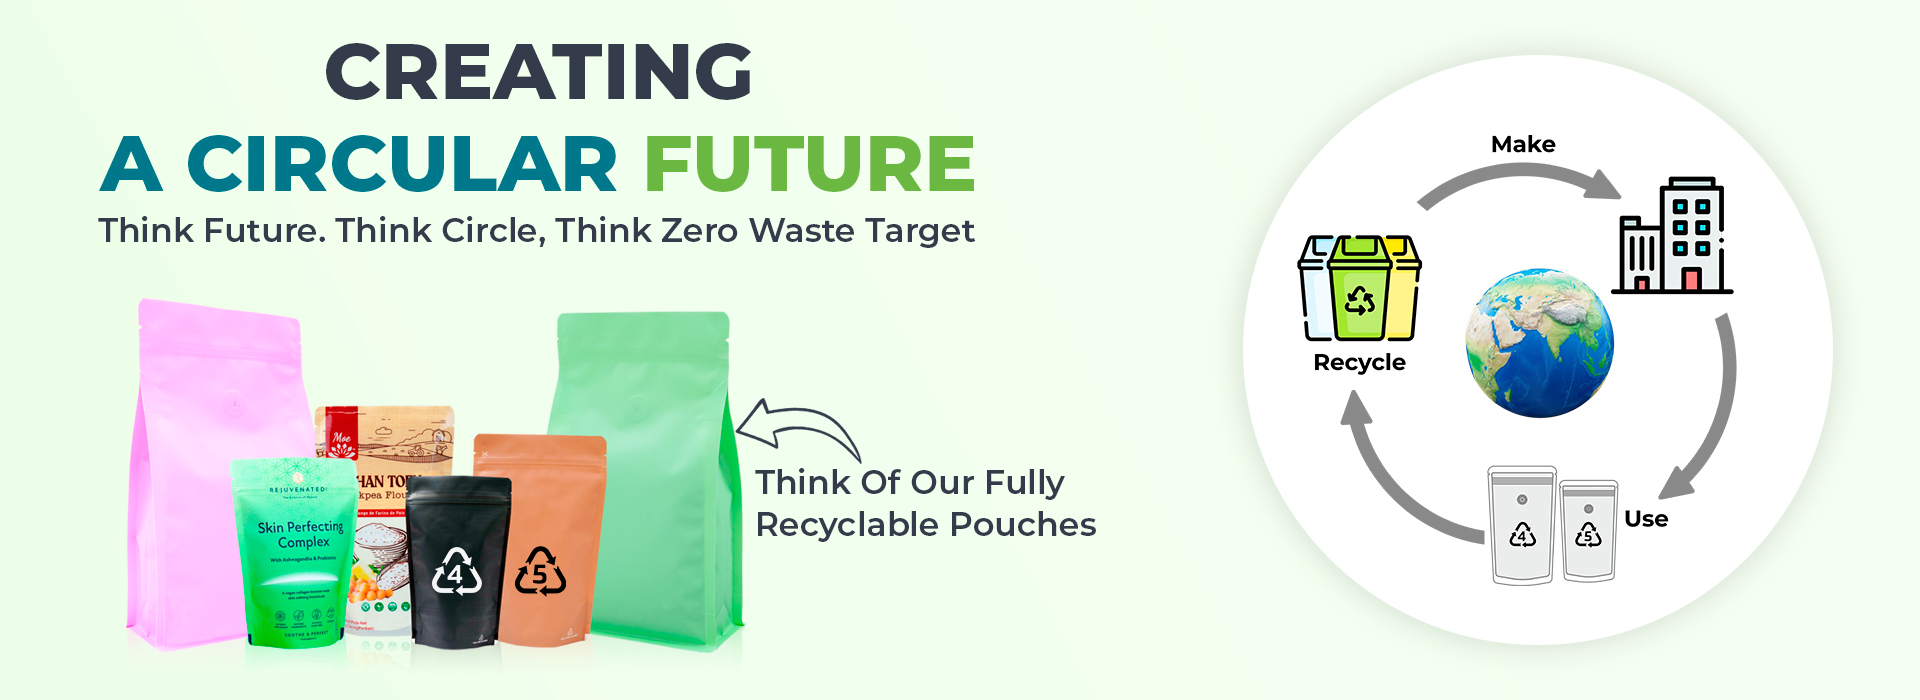 Fully Recyclable Pouches